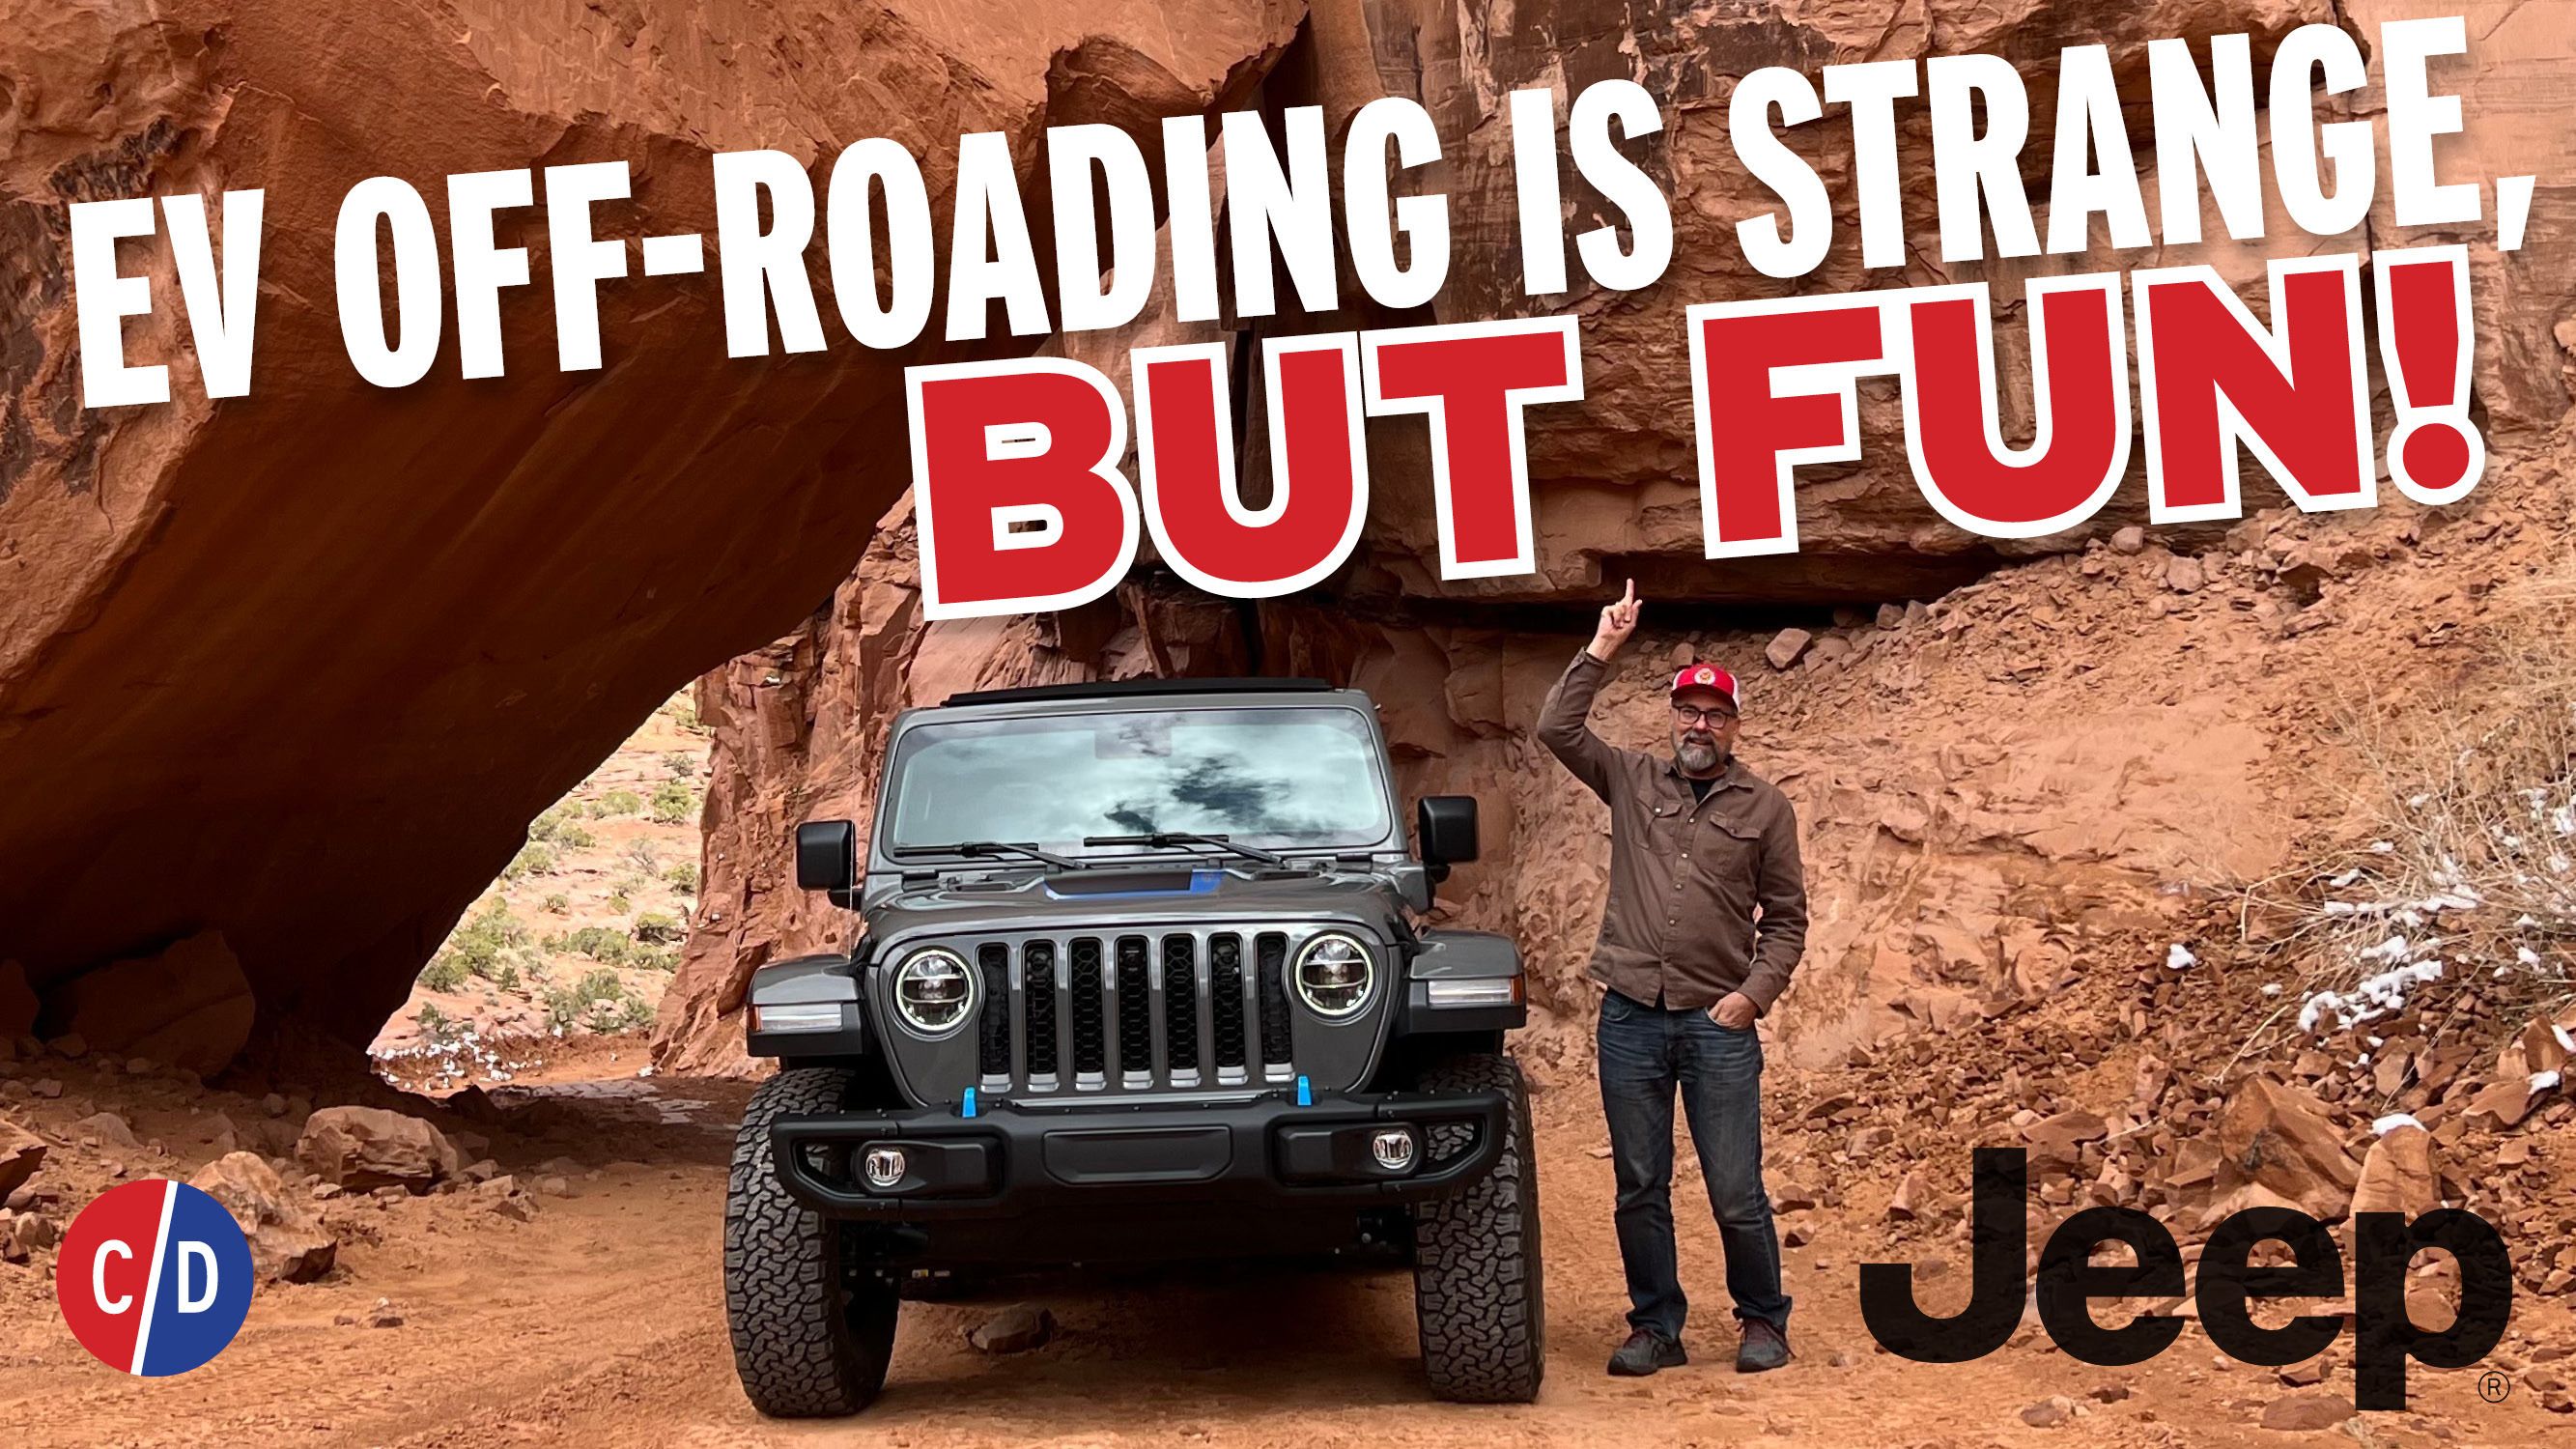 Video: We Sample Electric Off-Roading at the 2022 Easter Jeep Safari